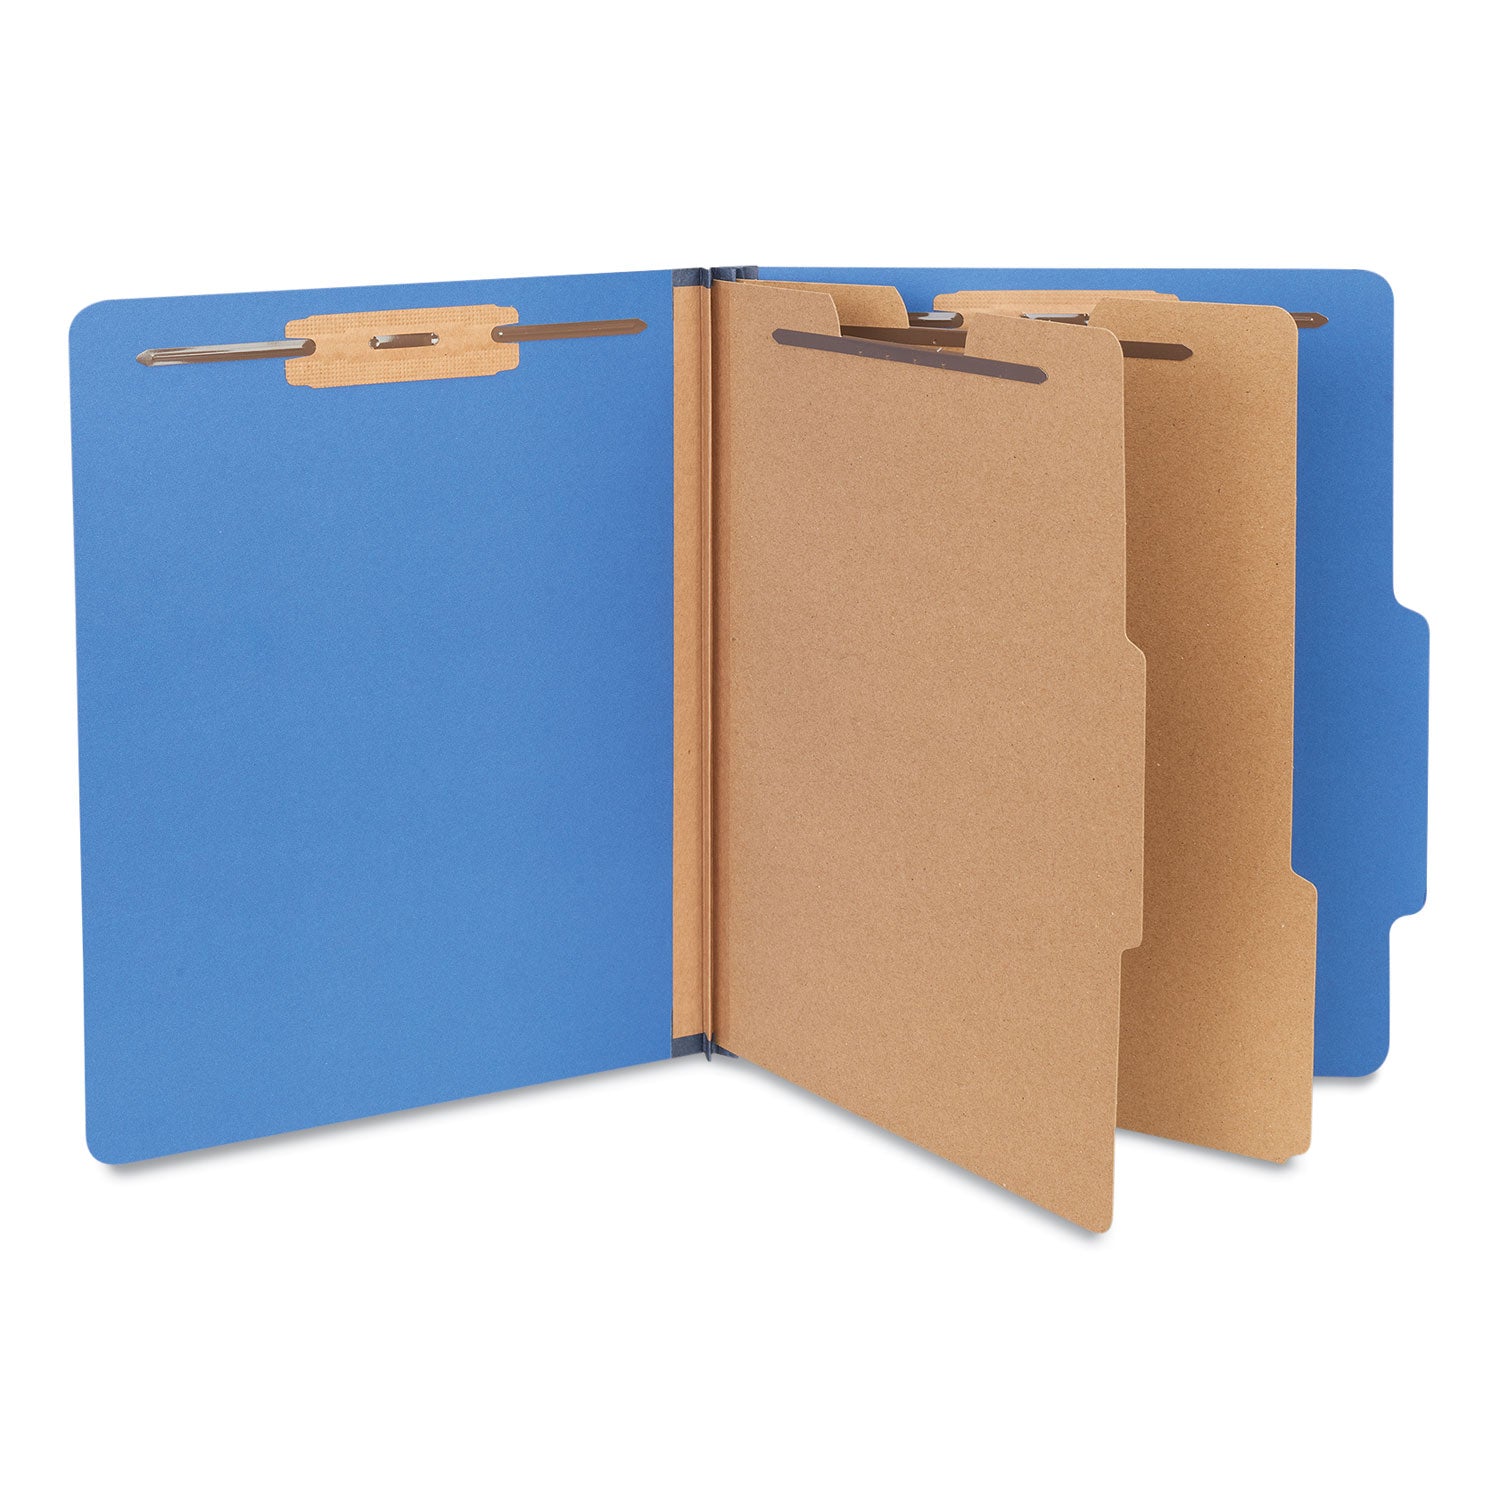 six-section-pressboard-classification-folders-25-expansion-2-dividers-6-fasteners-letter-size-blue-10-box_unv10410 - 2